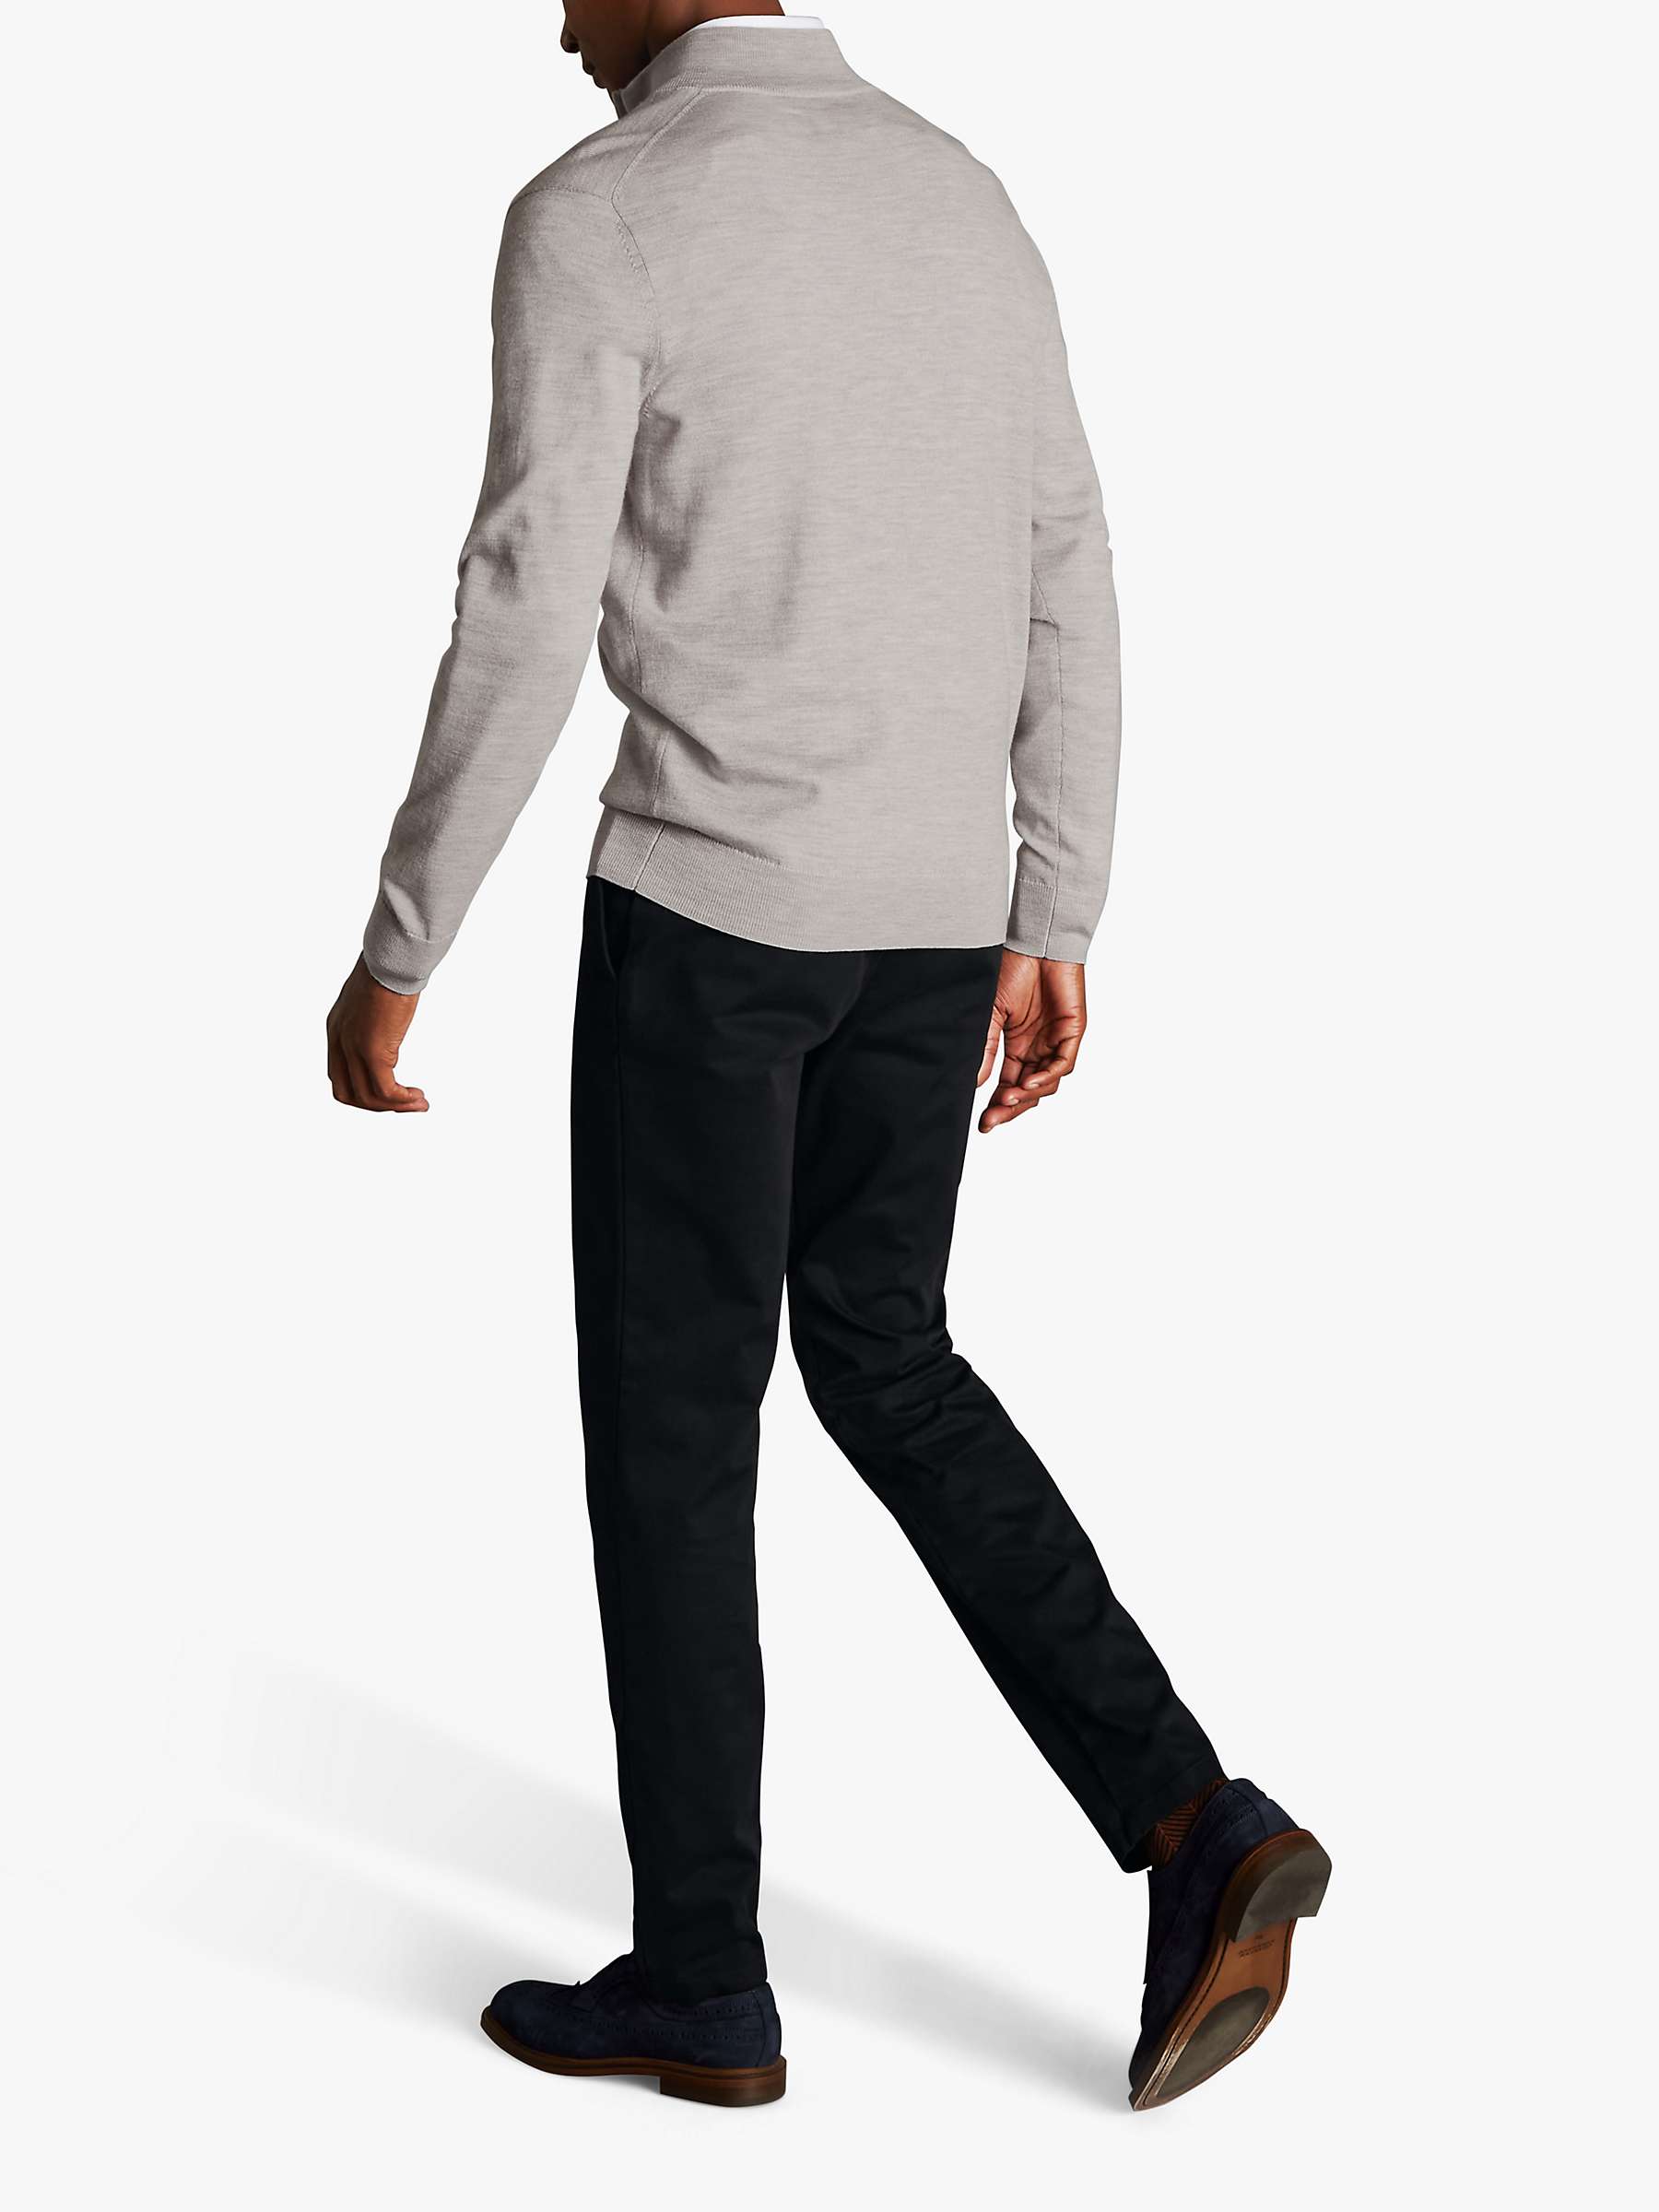 Buy Charles Tyrwhitt Ultimate Non-Iron Slim Fit Chinos Online at johnlewis.com